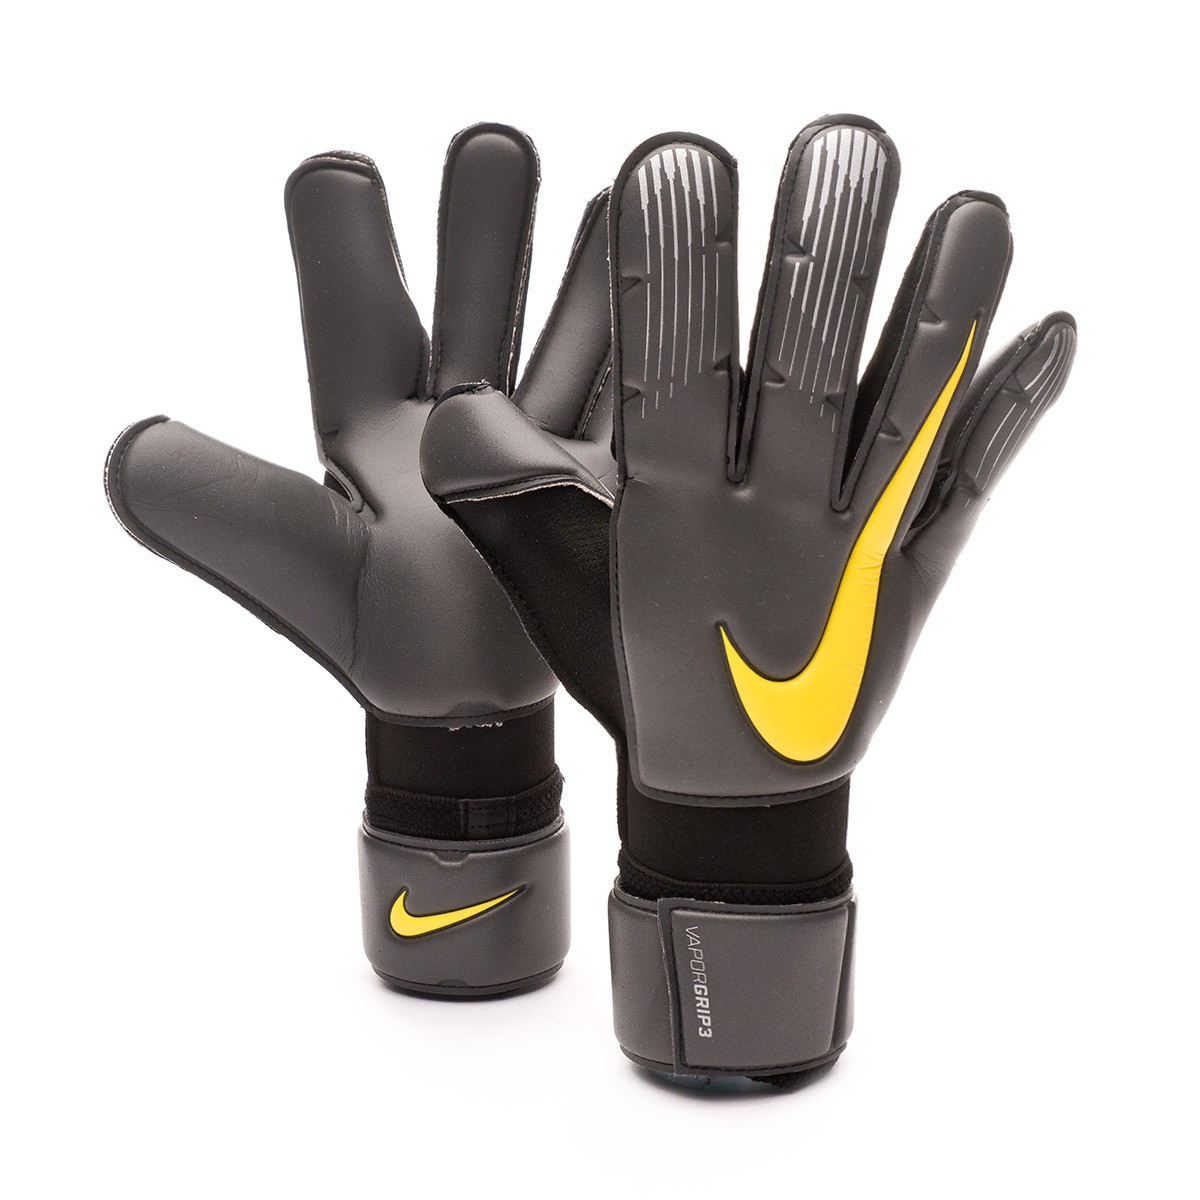 yellow youth football gloves